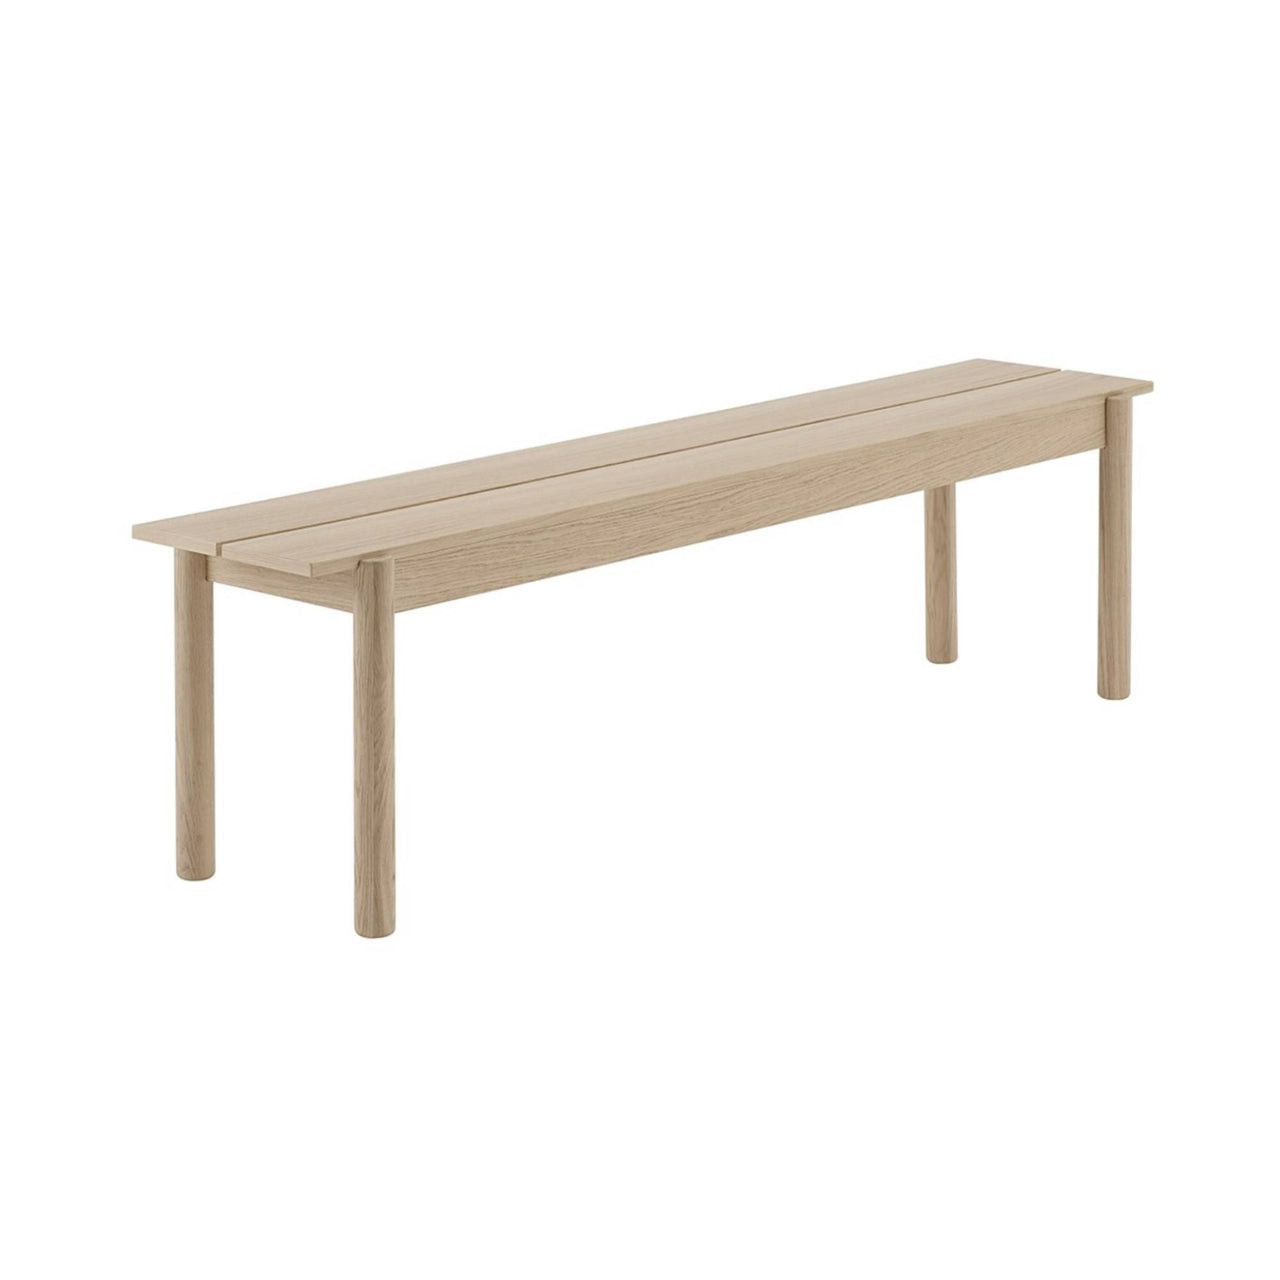 Linear Wood Bench: Large - 66.9